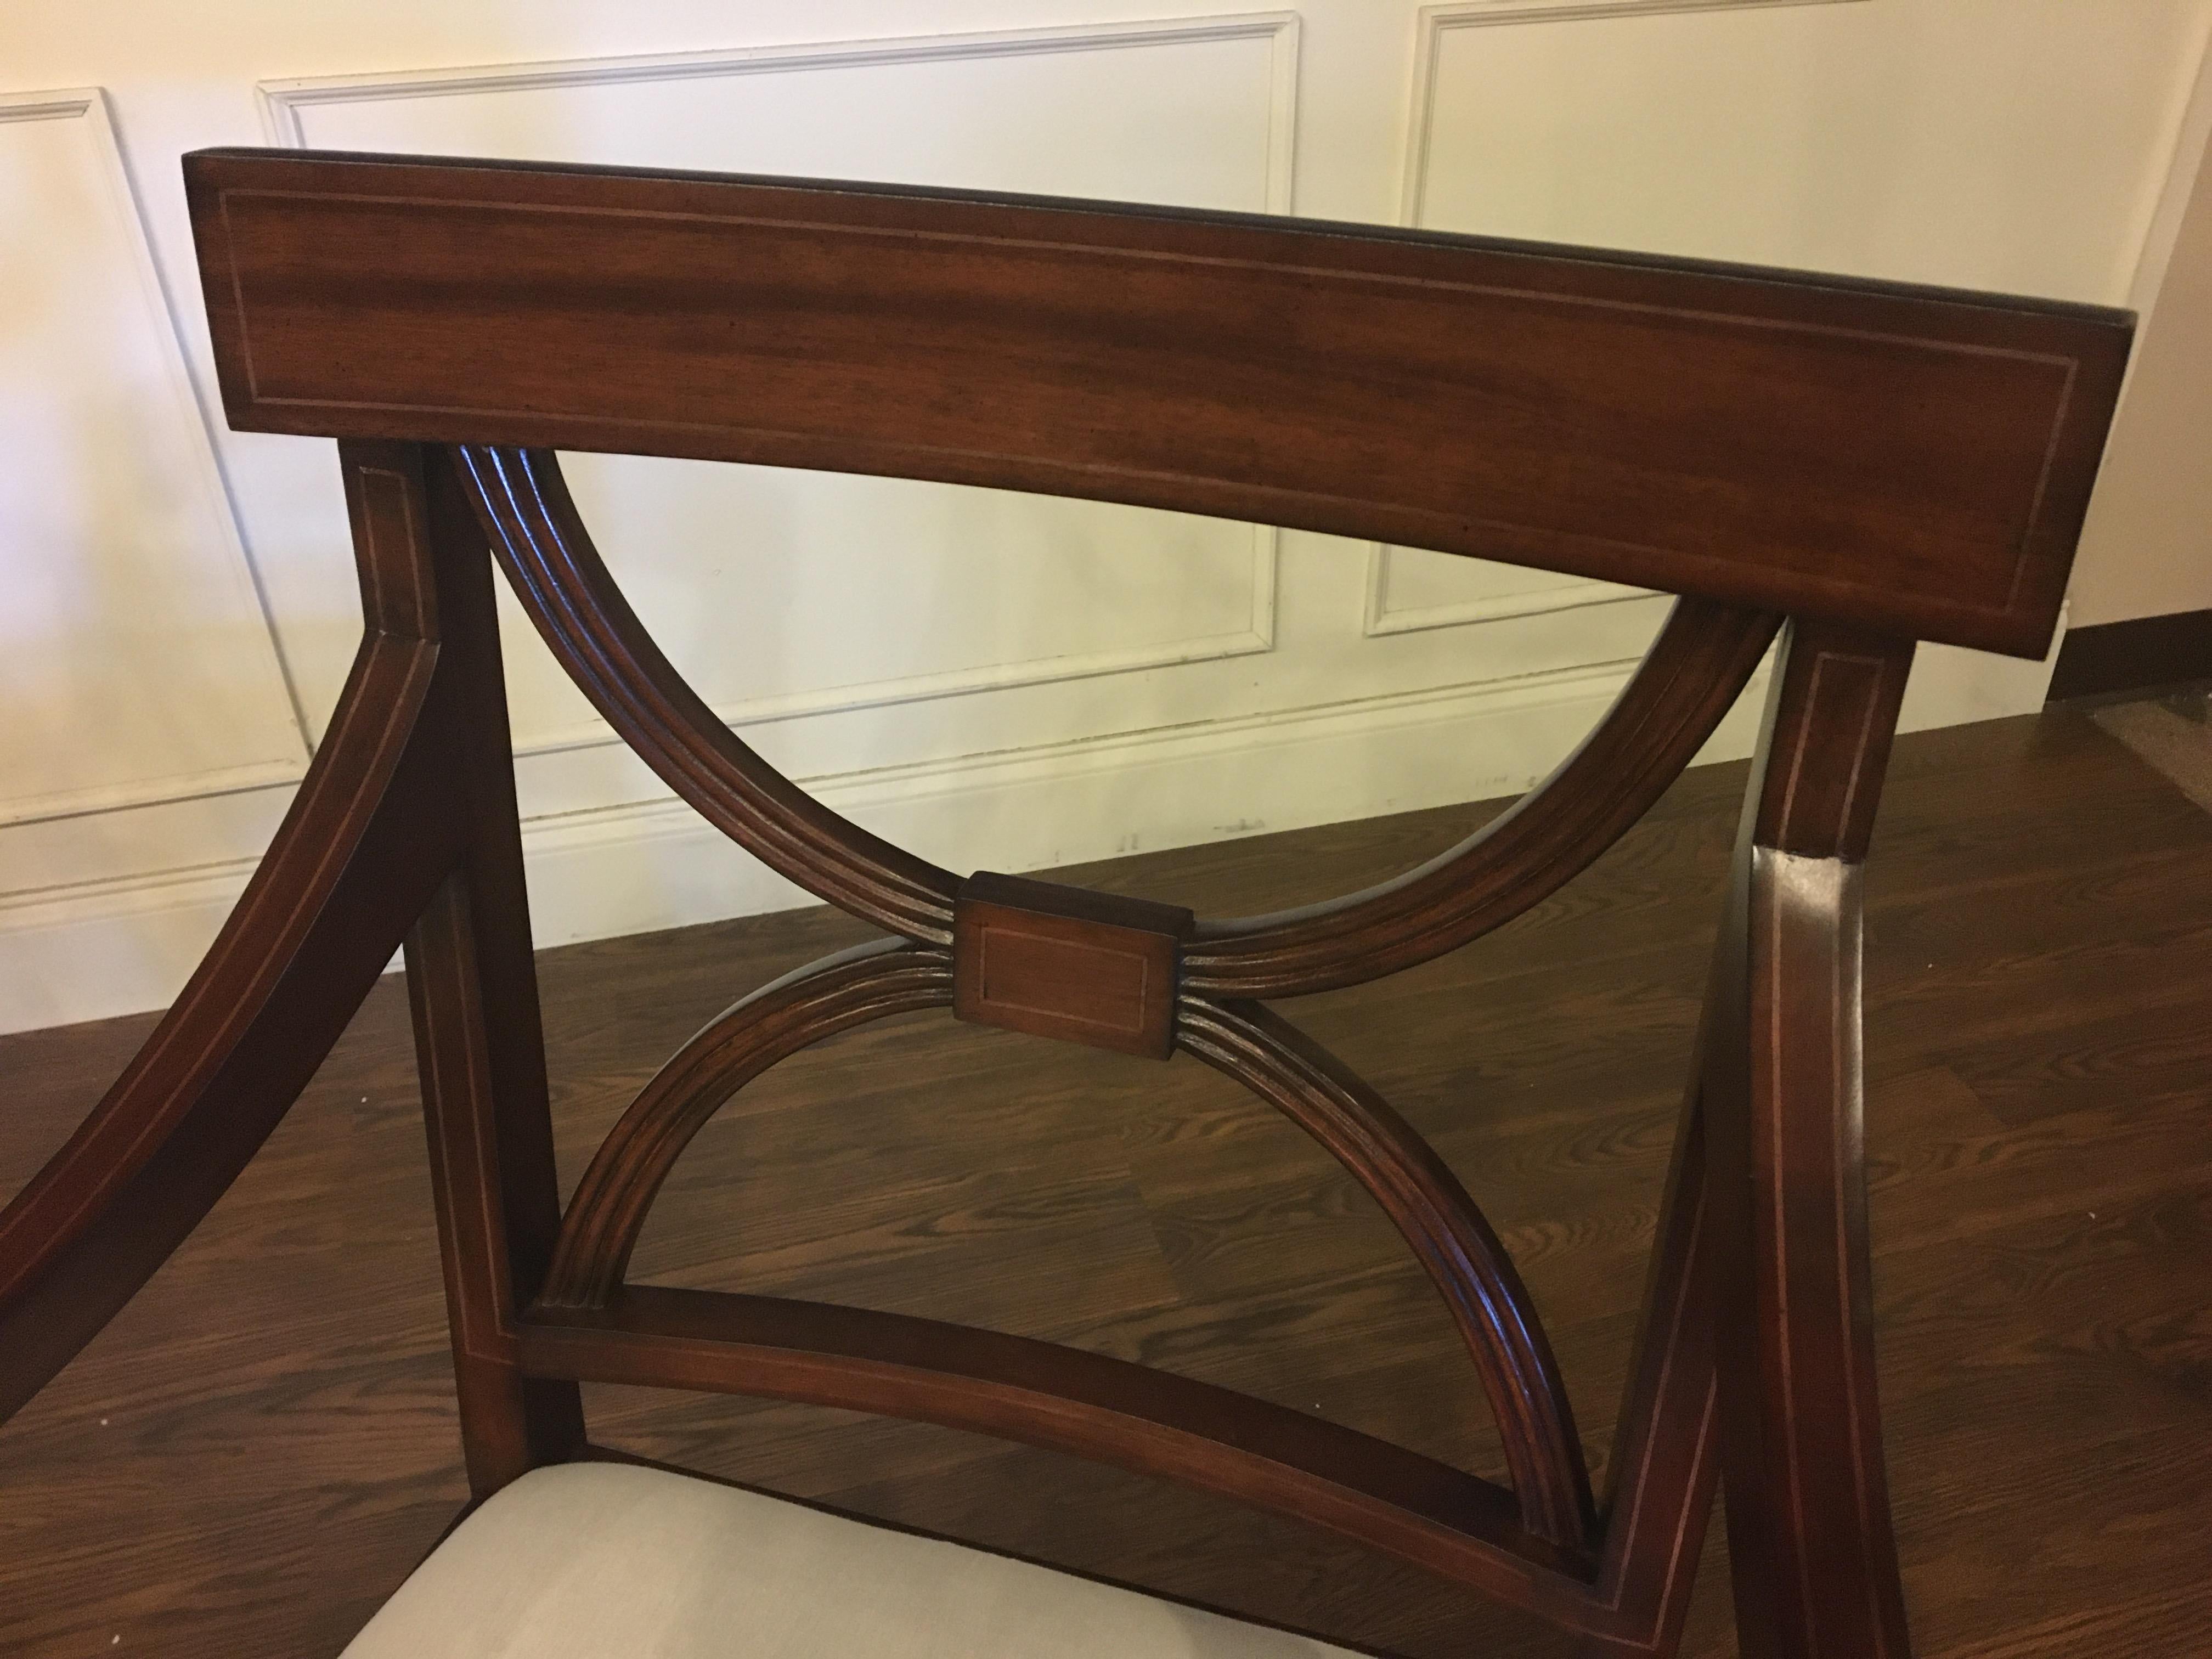 Regency Eight New Traditional Mahogany Adams Style Inlaid Dining Chairs by Leighton Hall